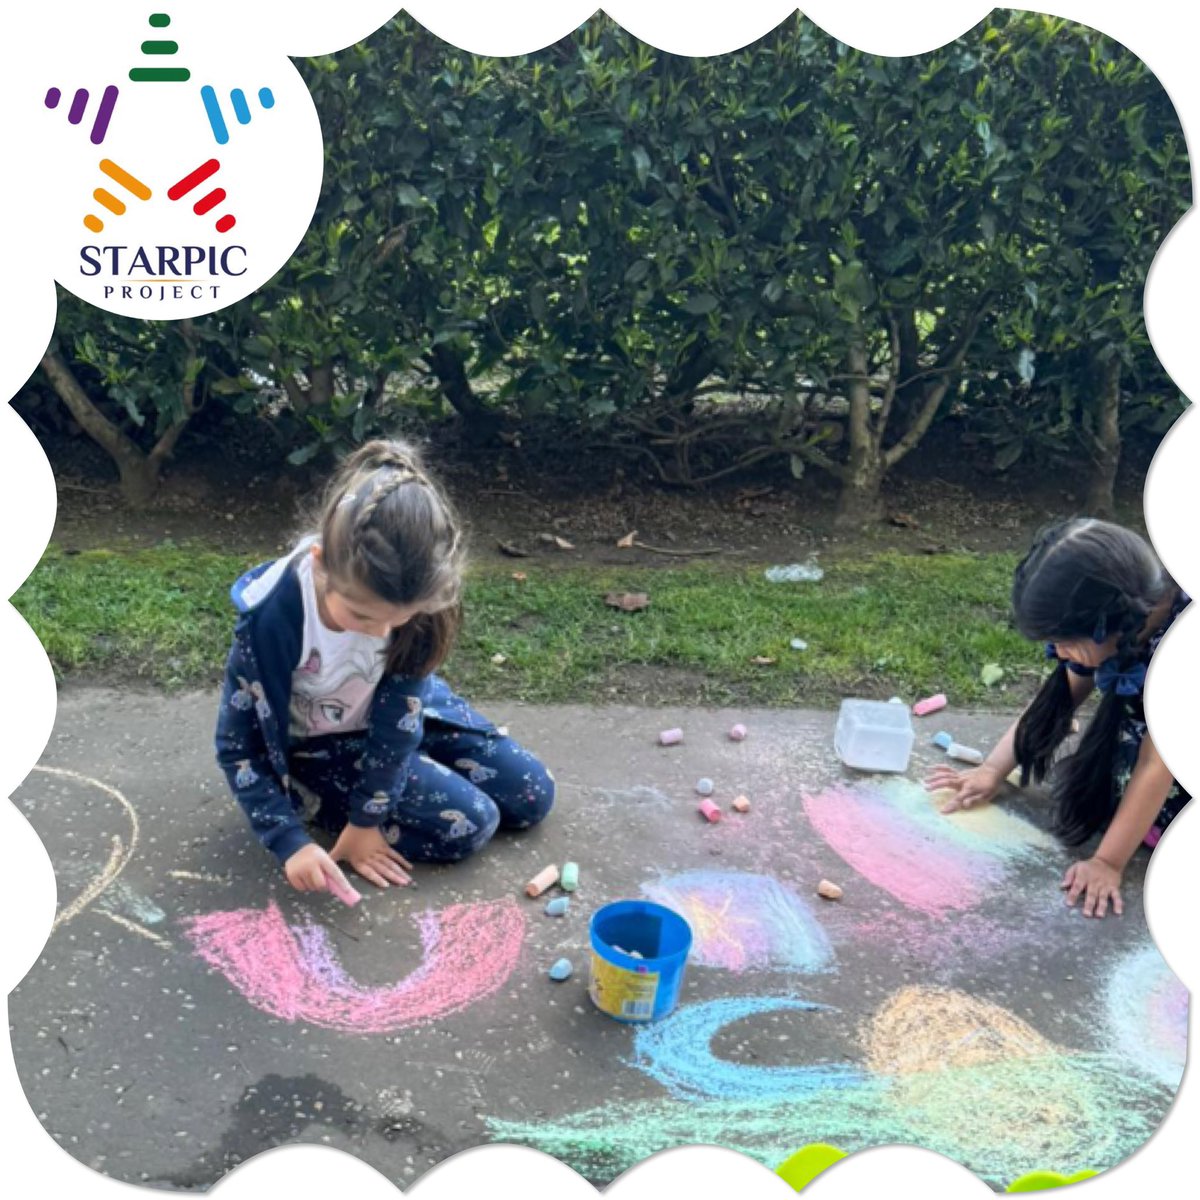 Great to get outdoors, being creative, playing games and everyone having fun 👏🏻 _____________________ #youthwork #starpicproject #community #confidence #safespace #learning #transferableskillsets @YouthScotland @LAYC2015 @CSH_Edinburgh